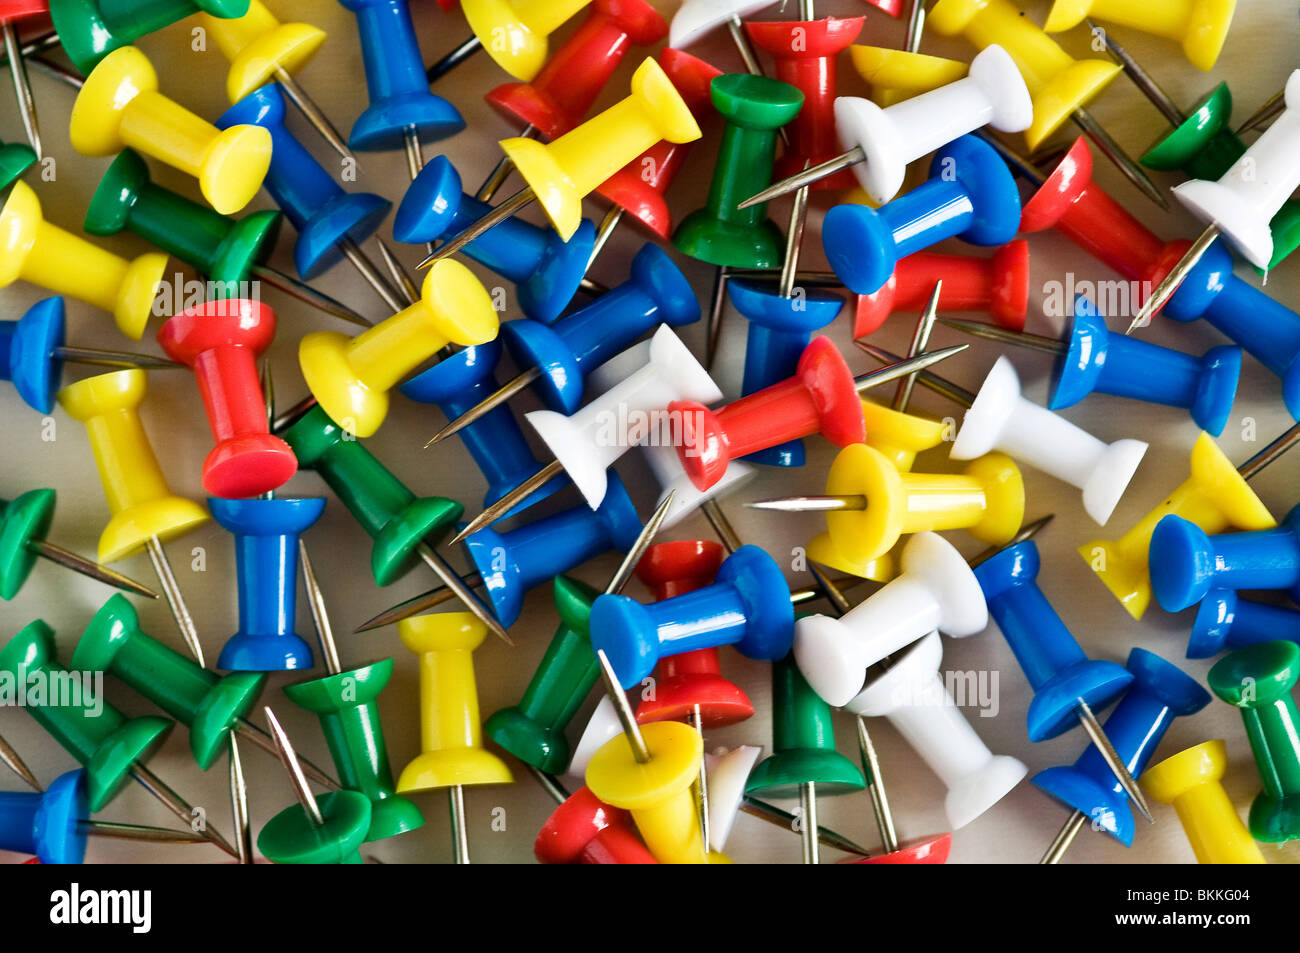 Collection of multi-coloured push pins. Stock Photo